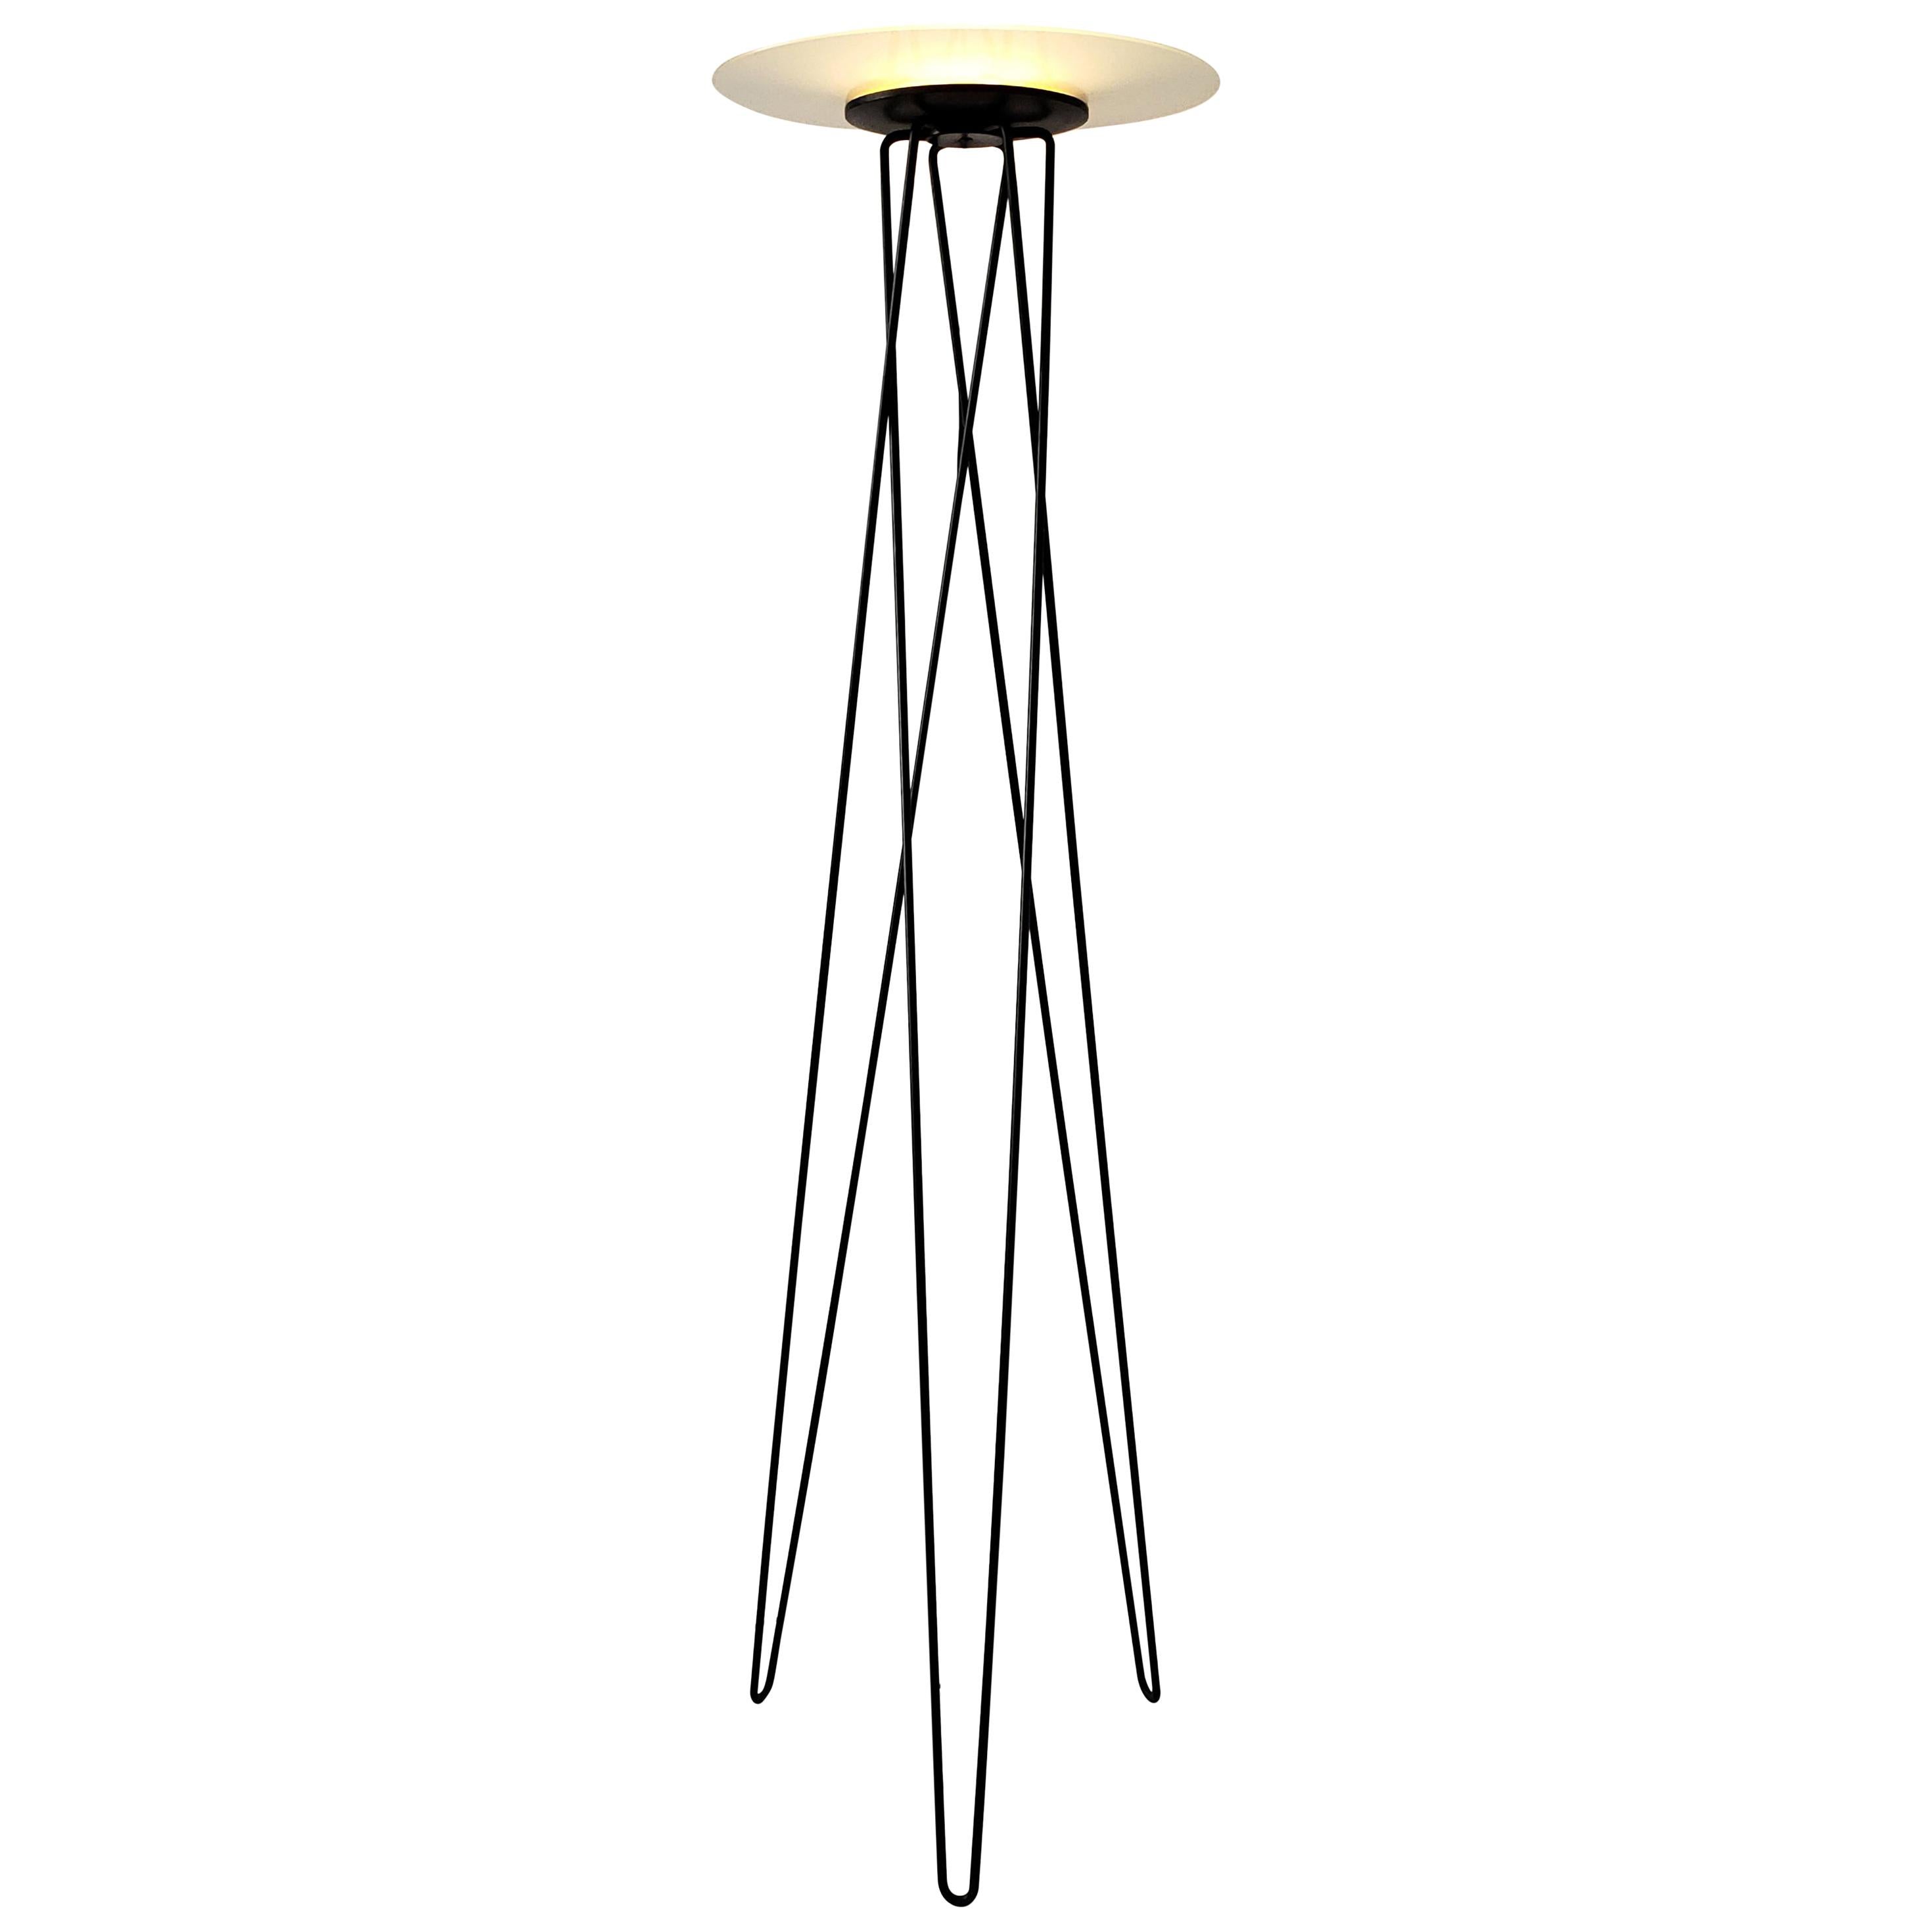 1980s Tall Halogen Floor Lamp with Hairpin Leg, Italy For Sale